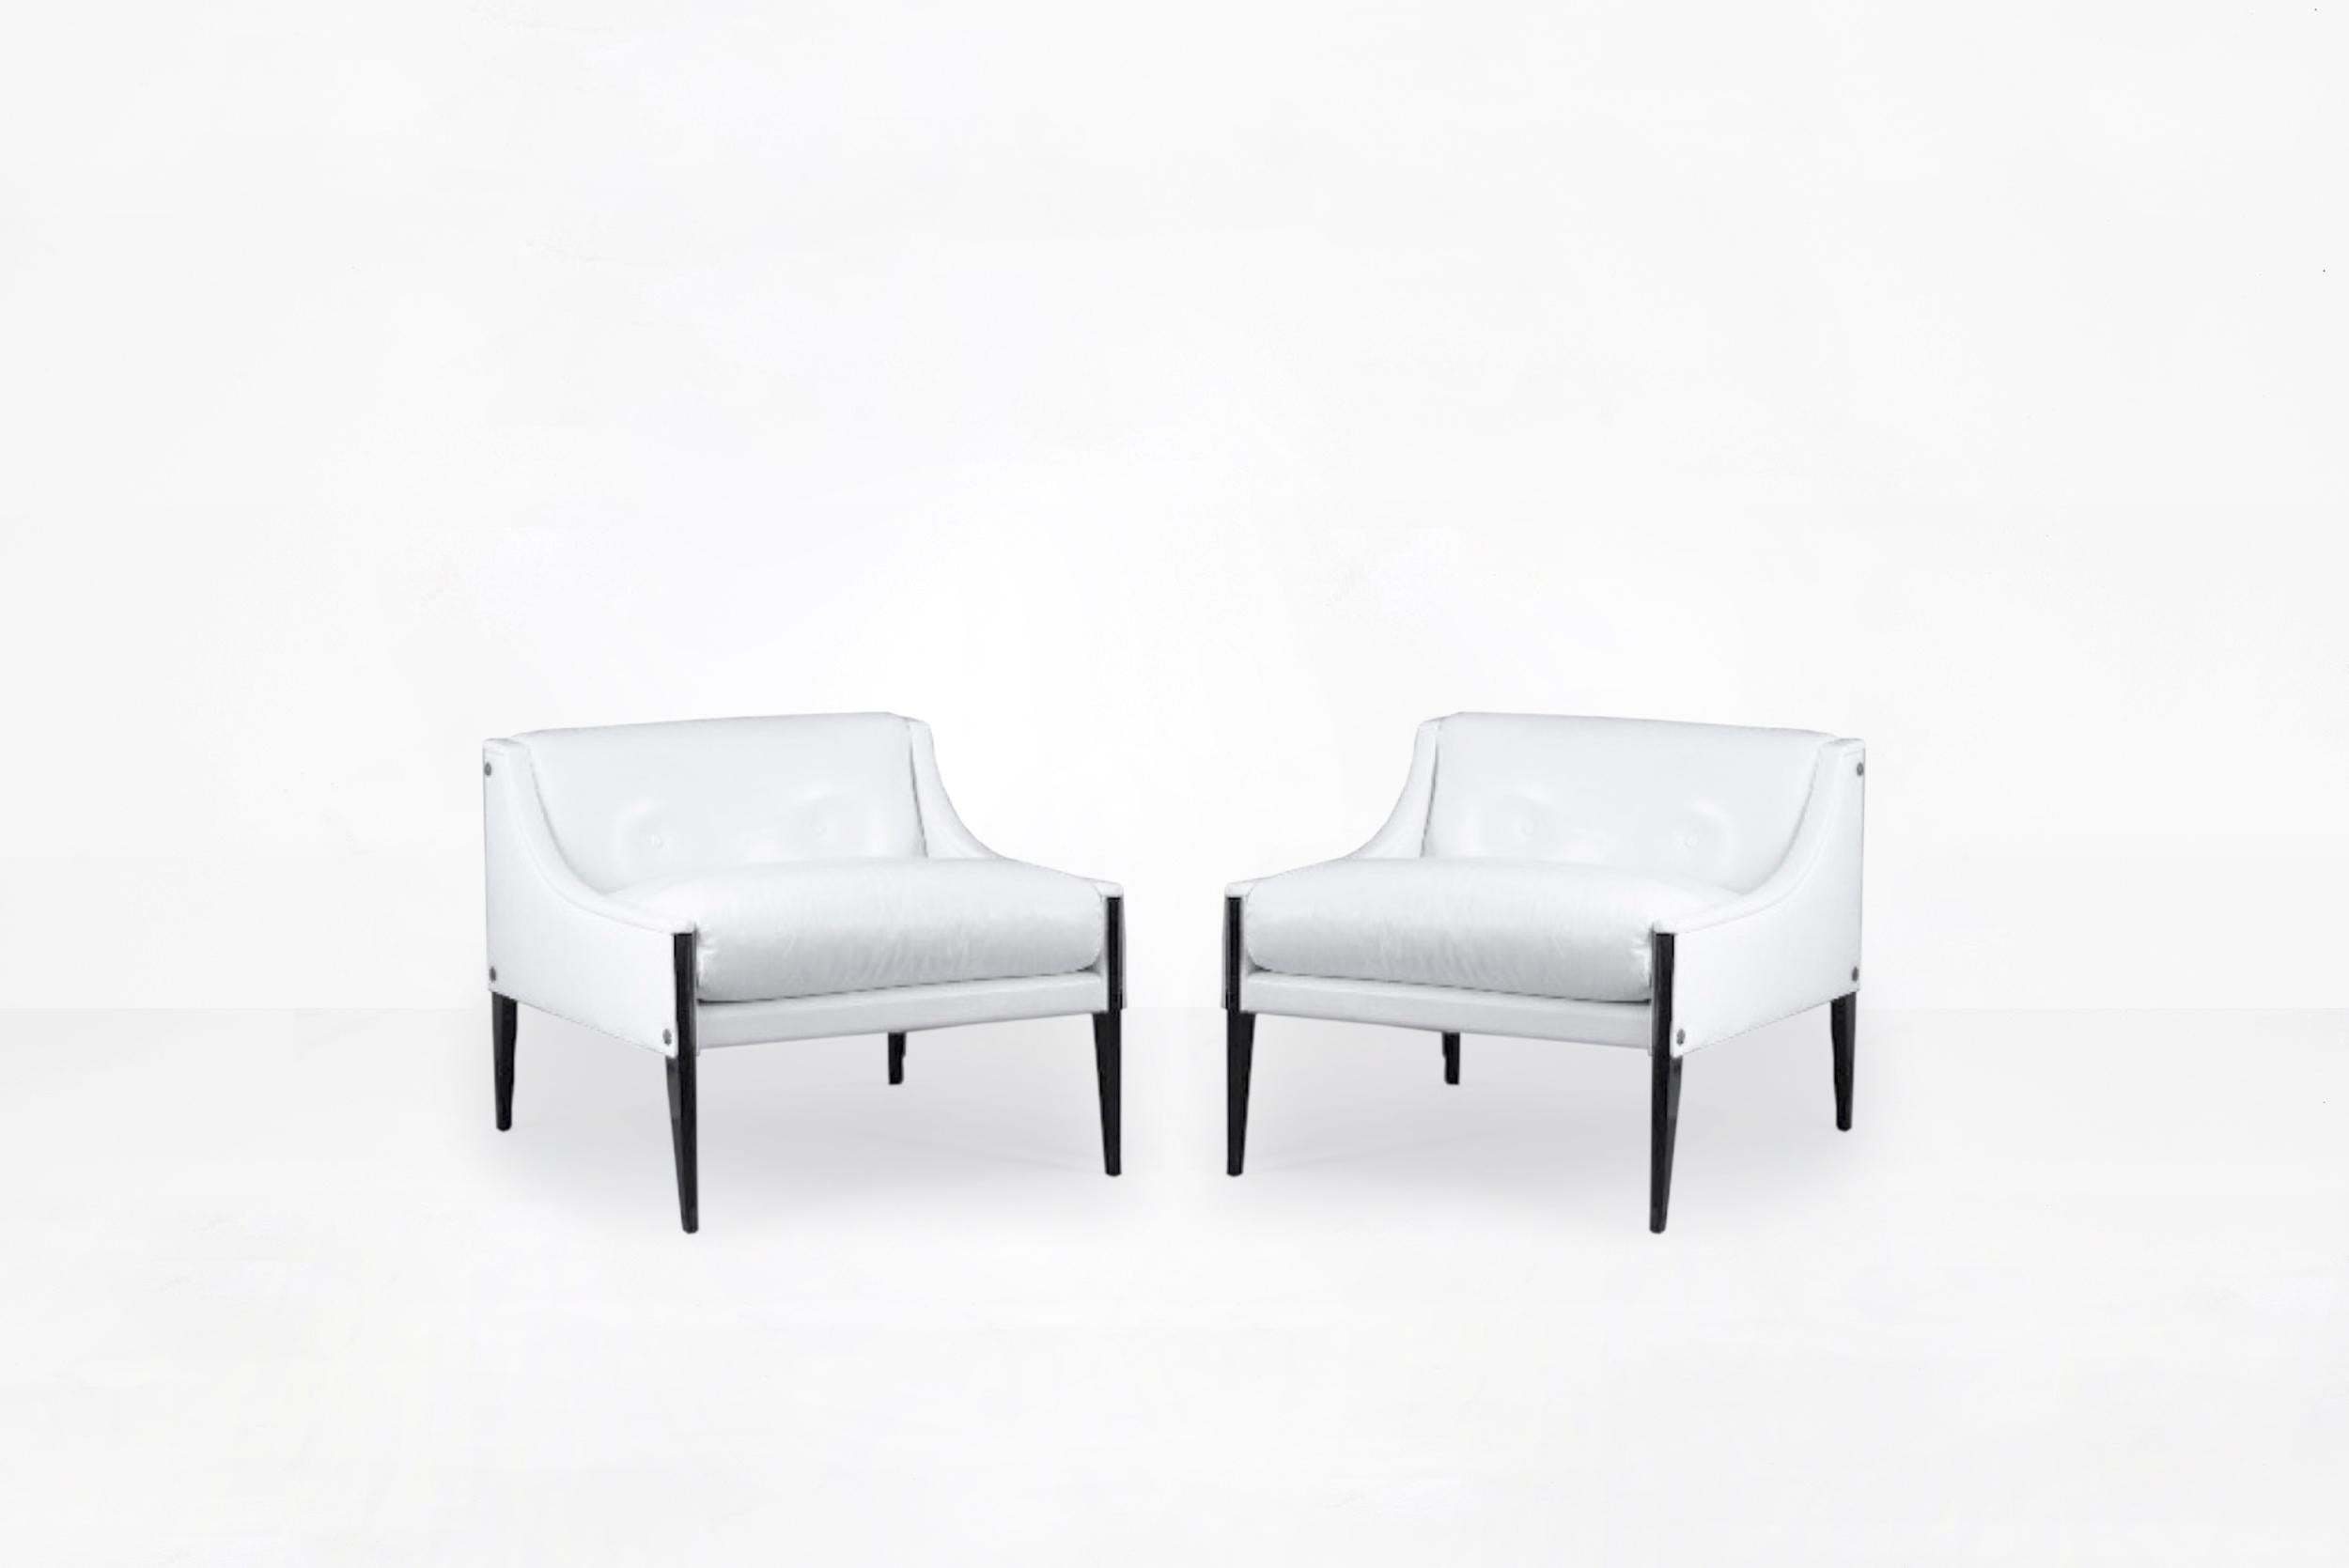 Rosewood Gio Ponti Pair of Armchairs, Model 'Dezza', Italy, 1965